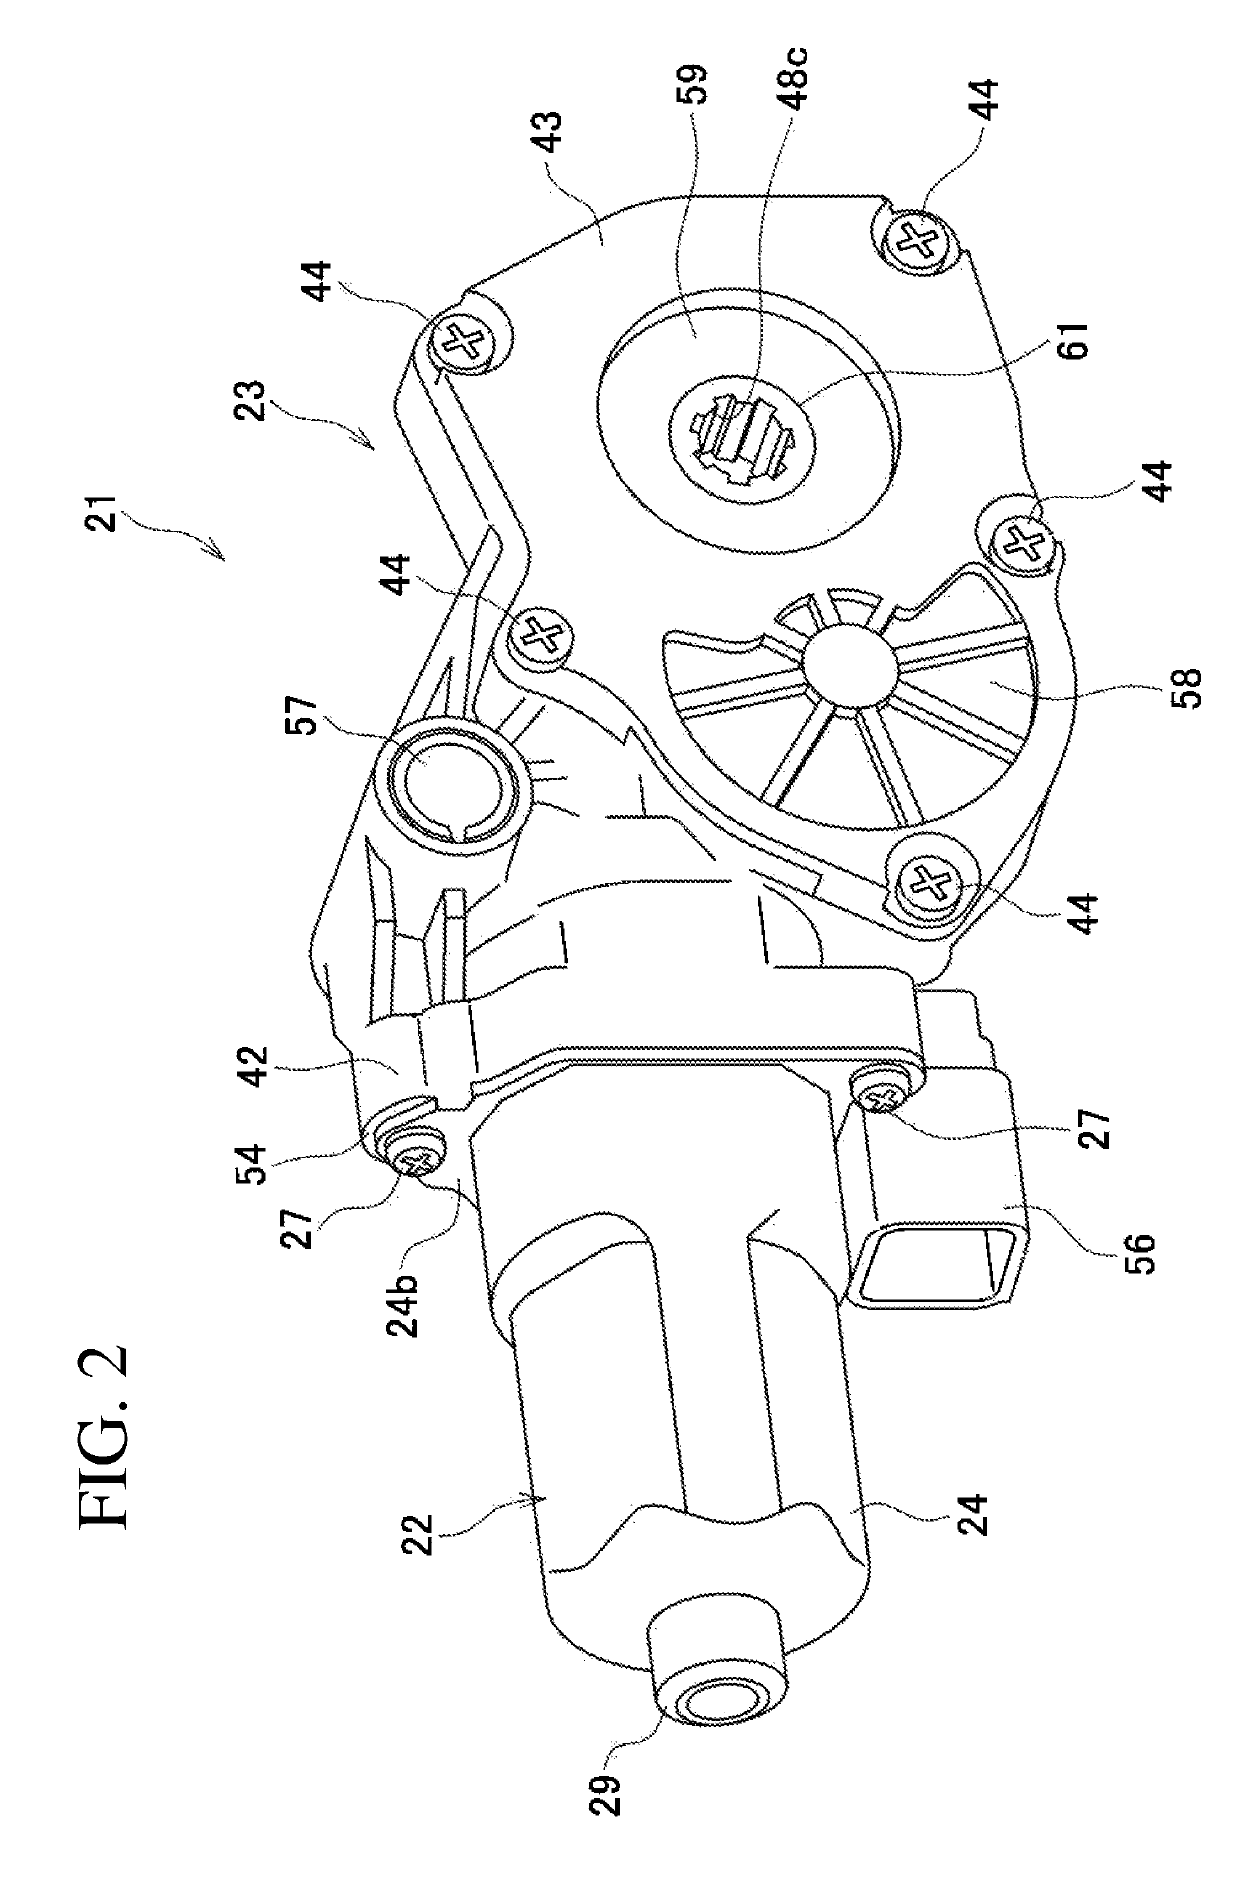 Seat driving device